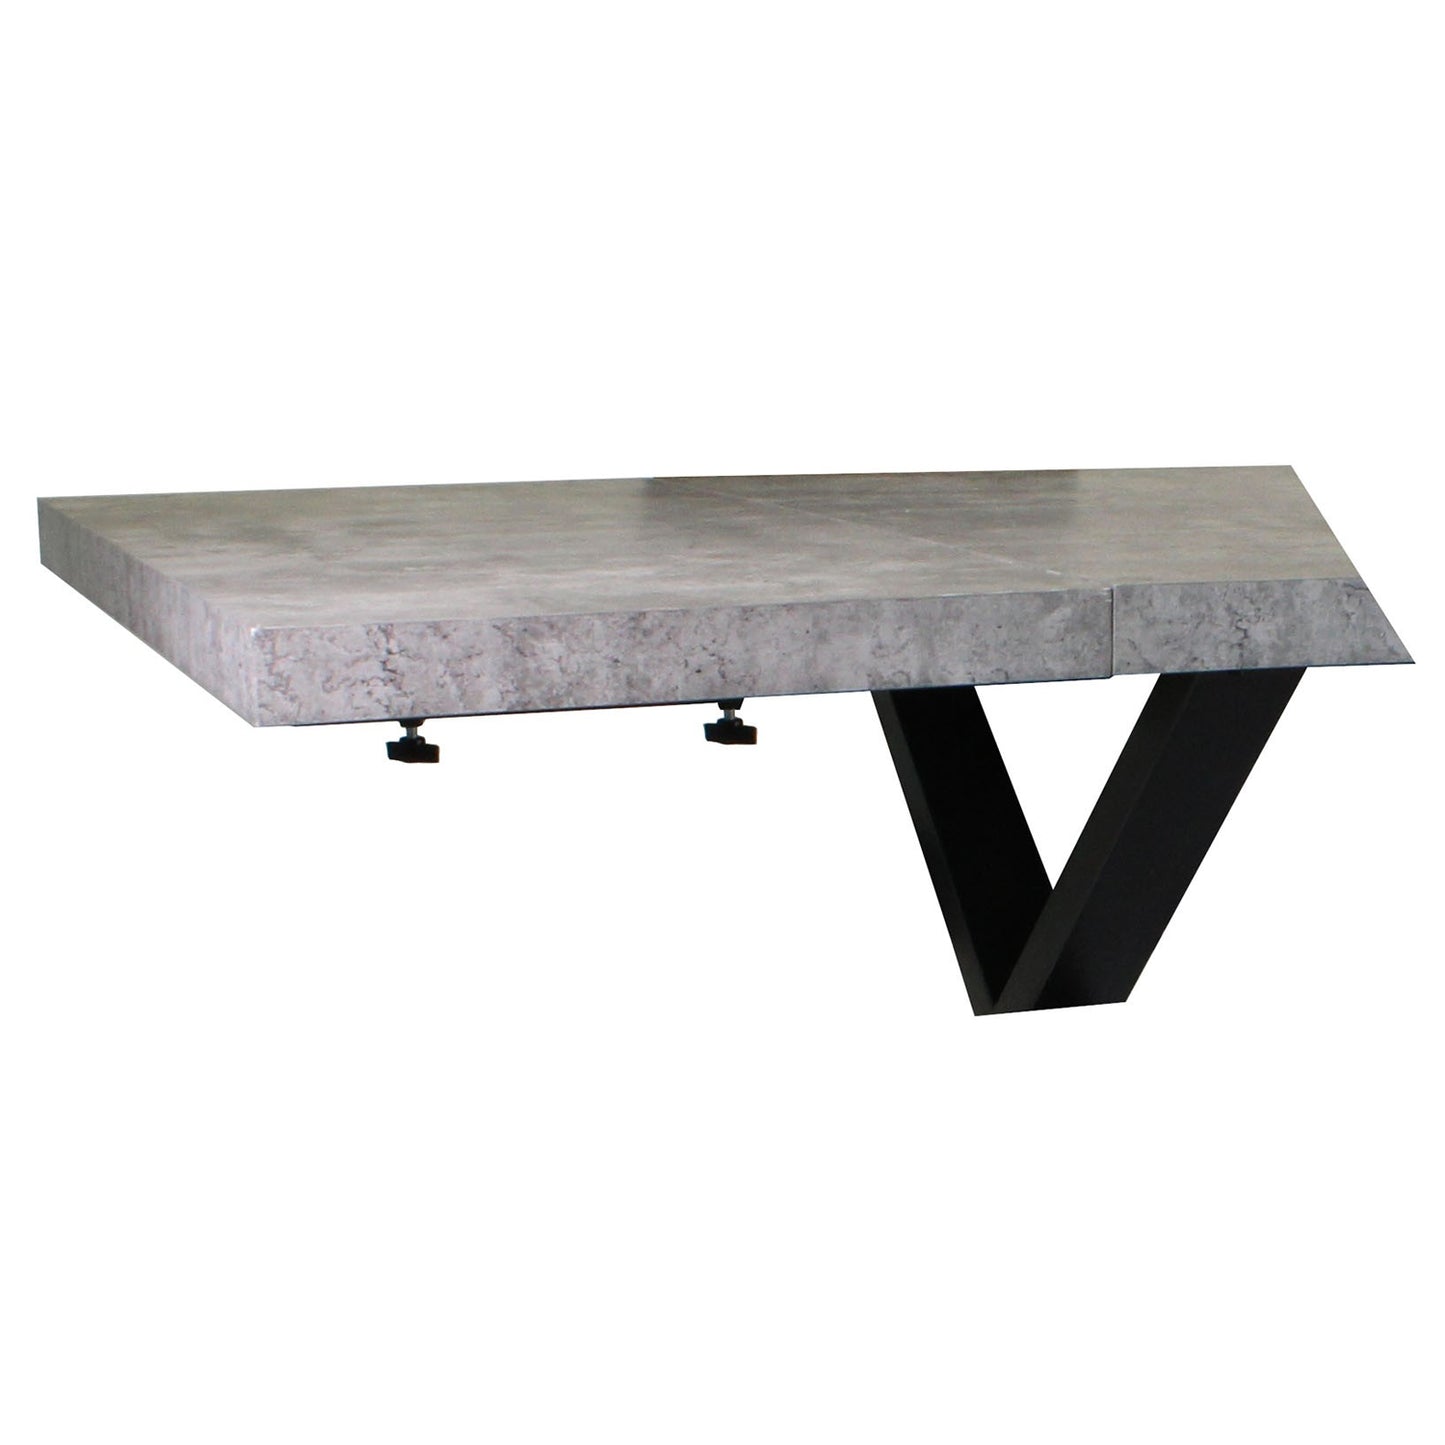 Elsworthy Stone Effect - Dining Table Extension Leaf